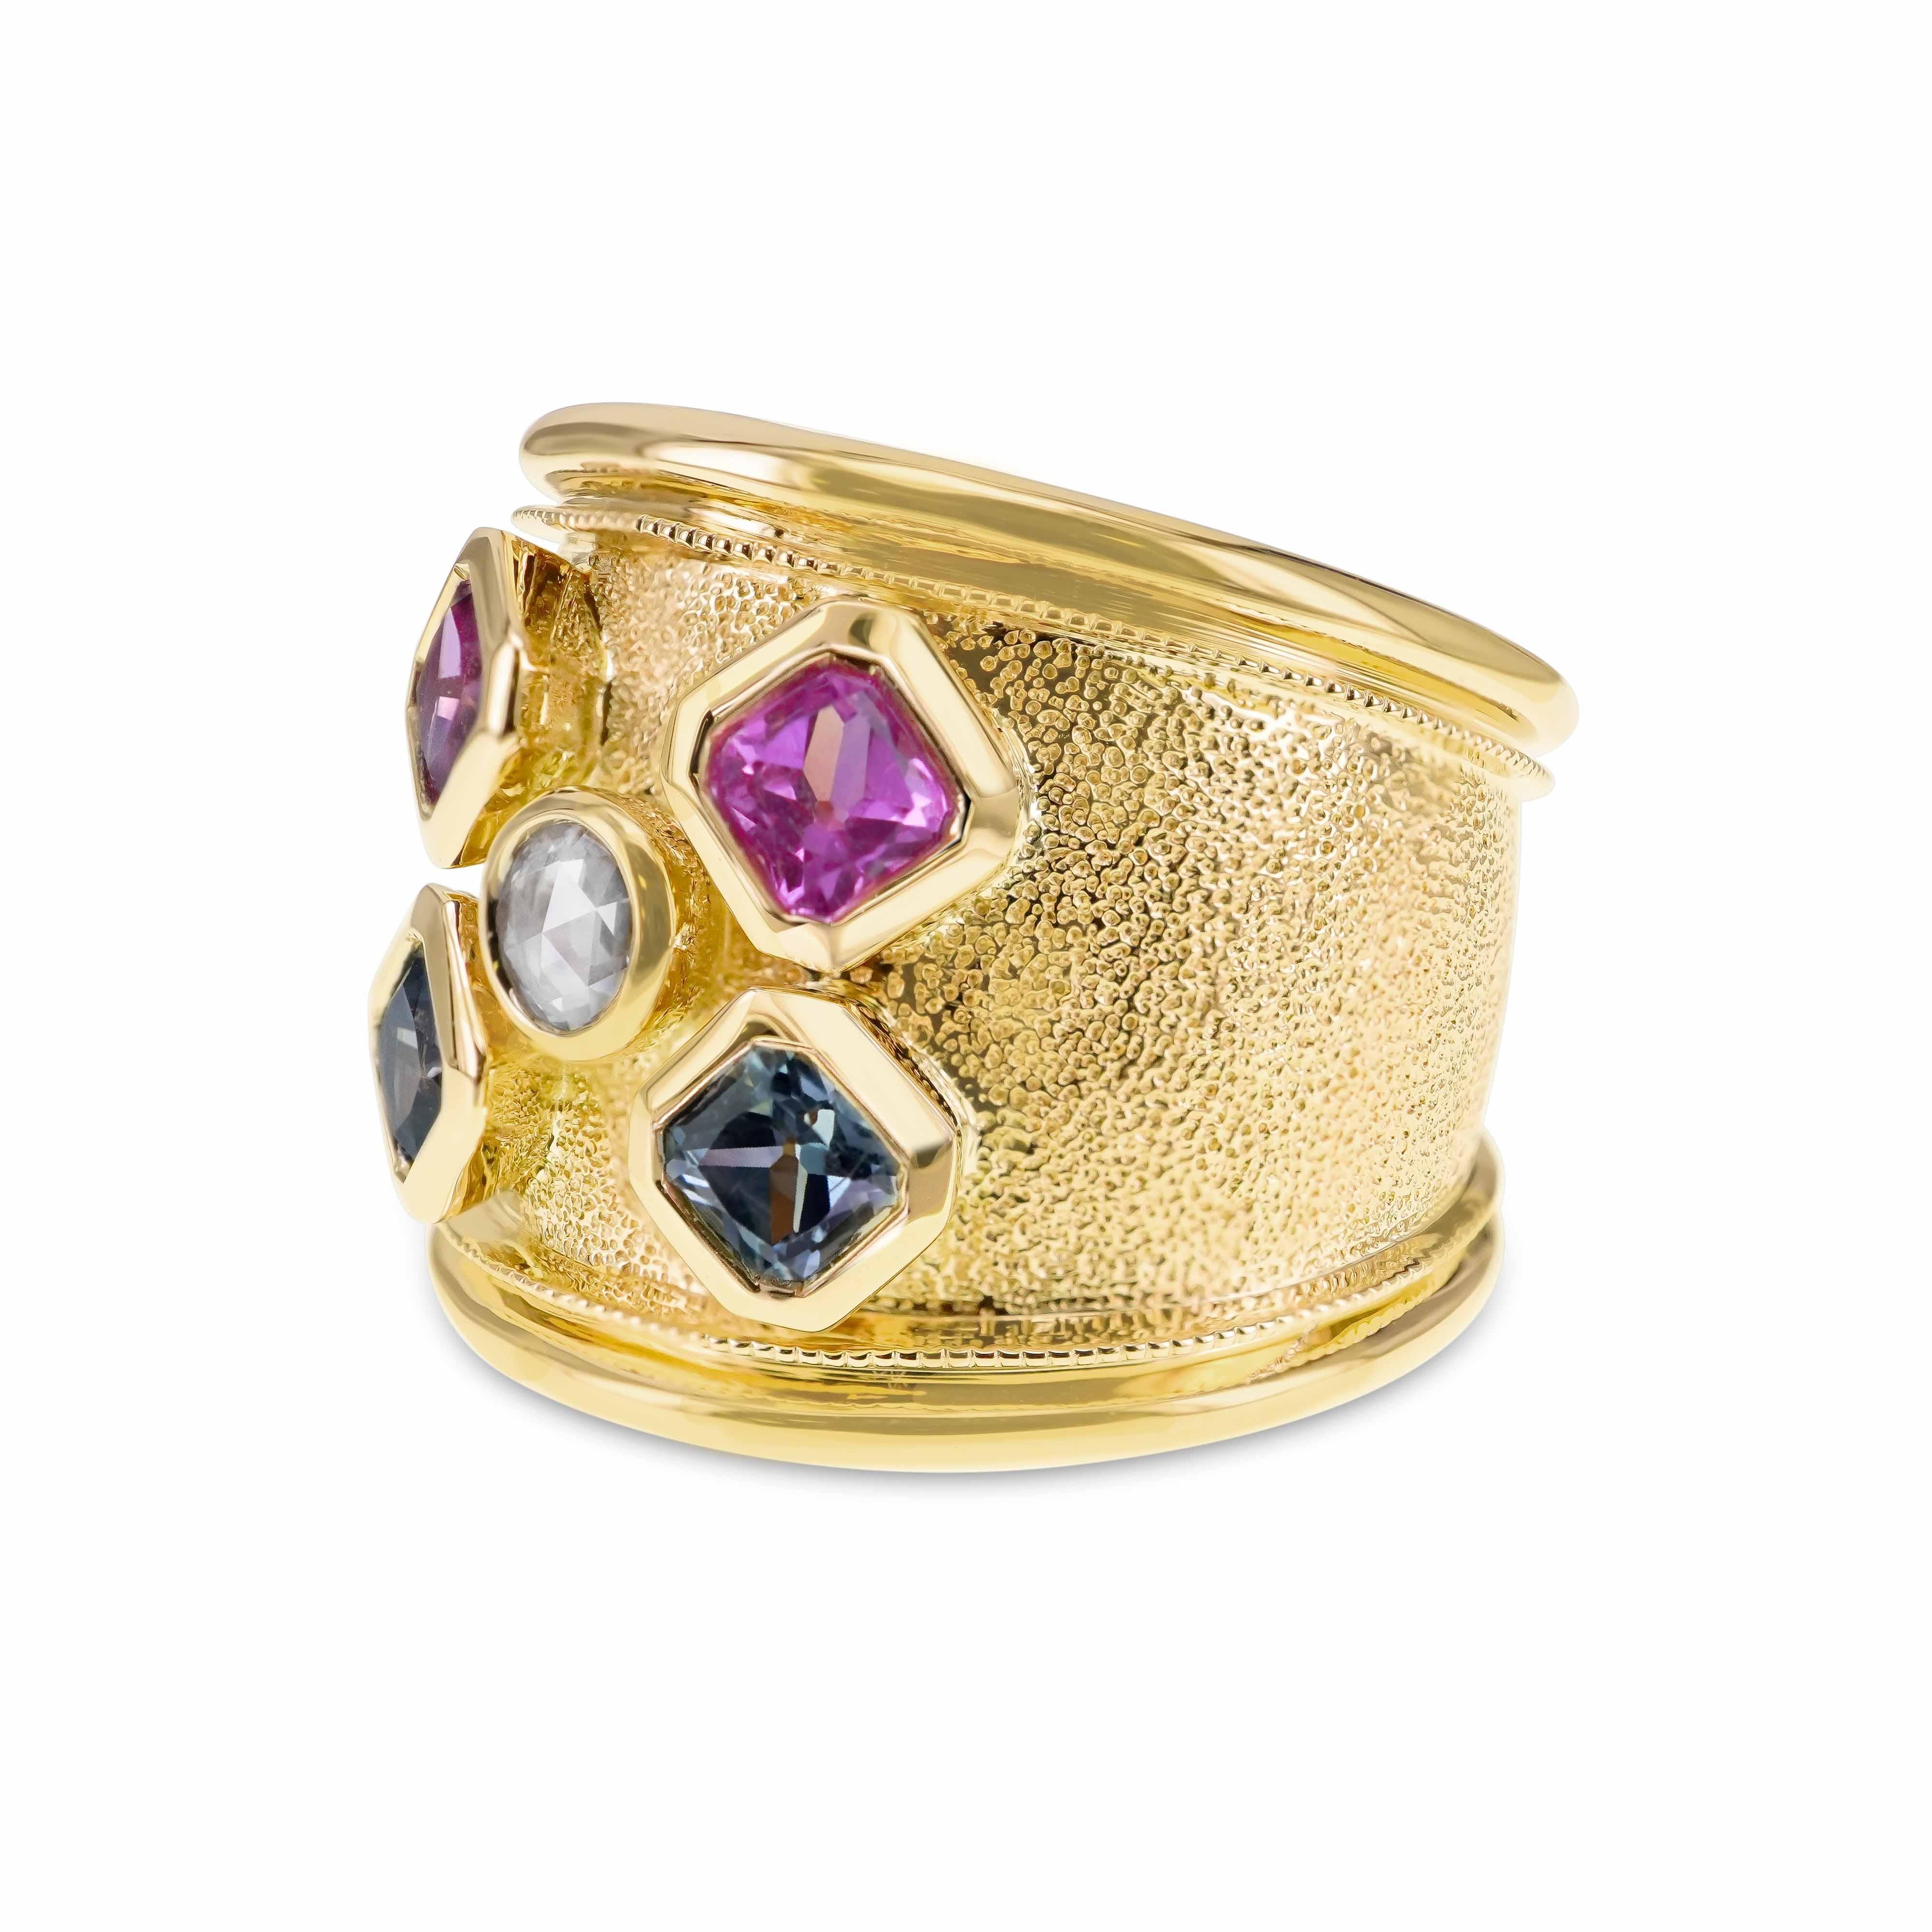 A beautiful ensemble of mix color no heat sapphire and diamond are set in this heavy 18K gold ring. The work on the gold is inspired by the works of the Italians. The gold weight is 15.18 grams and total diamond weight used in the ring is 0.27